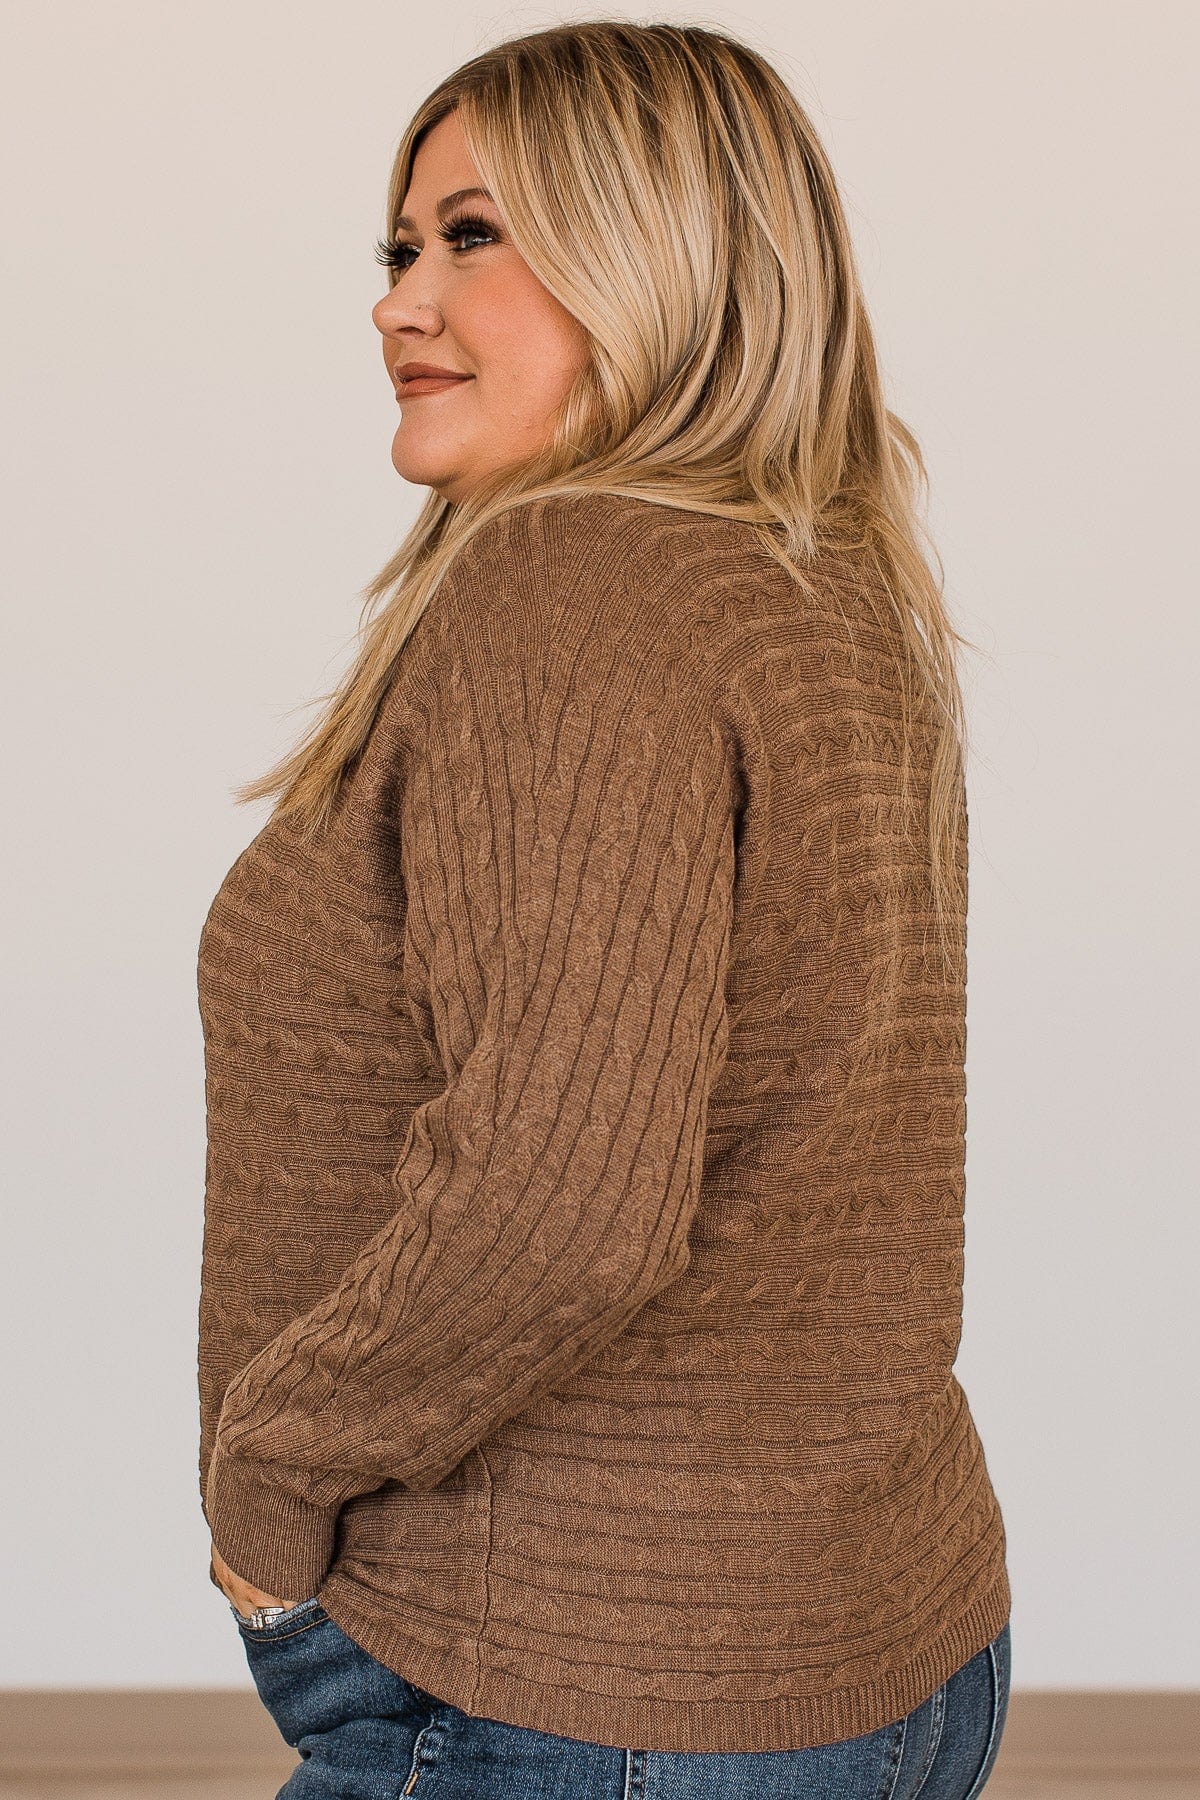 Strive To Stand Out Knit Top- Mocha